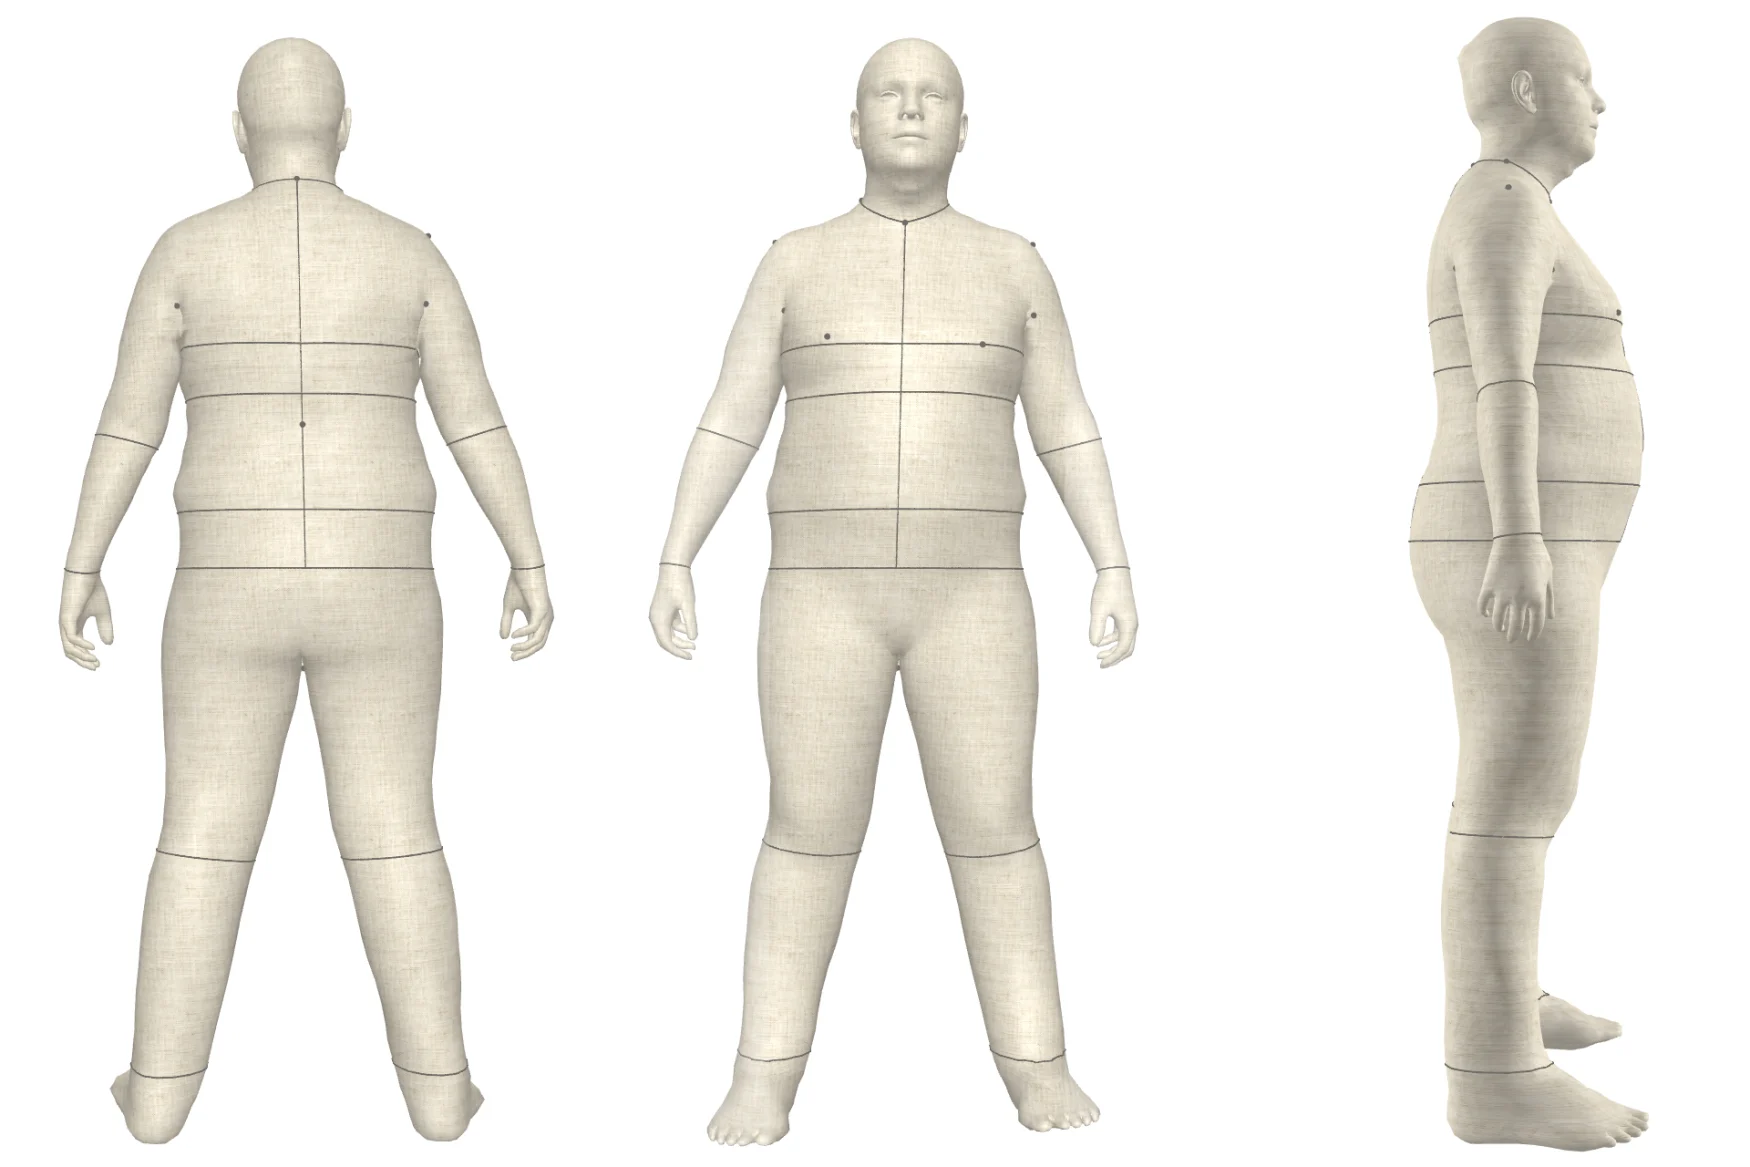 Images of journalist Dan Cooper after being run through TG3D's body scanning technology.